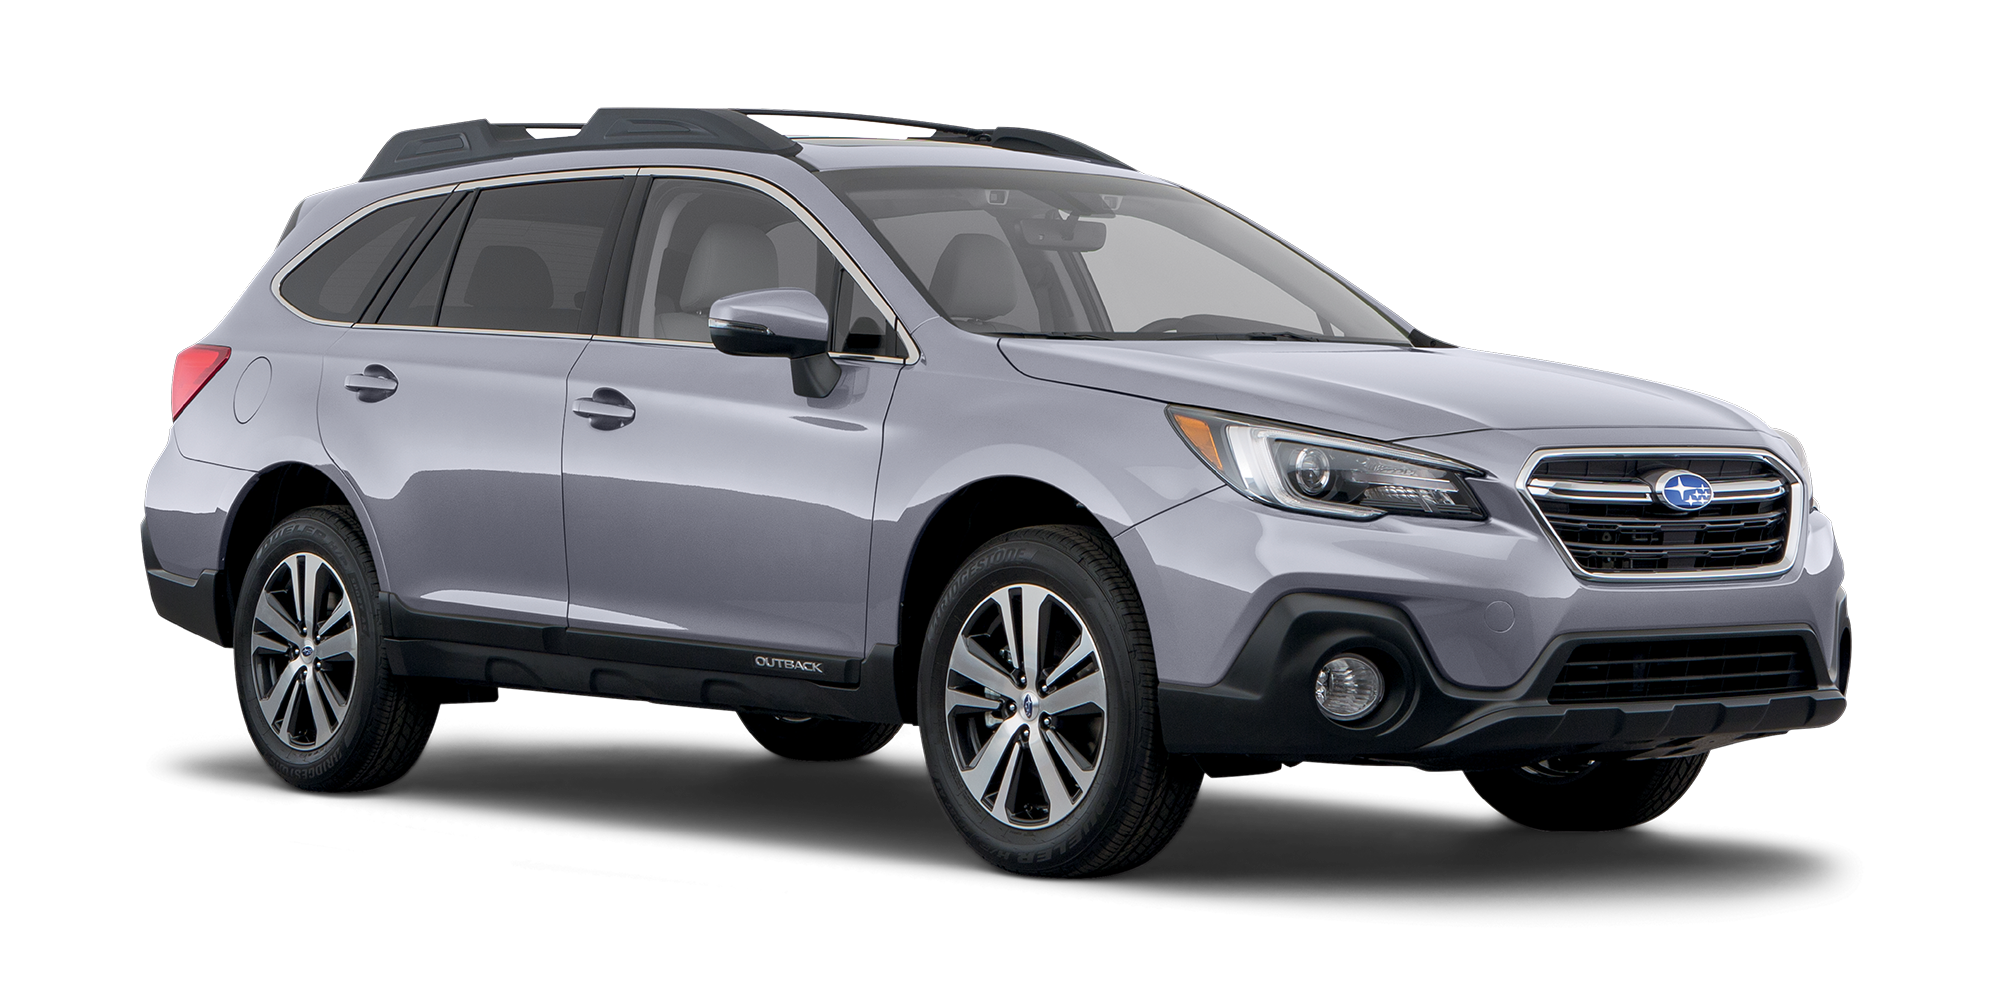 What Makes the 2018 Subaru Forester and 2018 Subaru